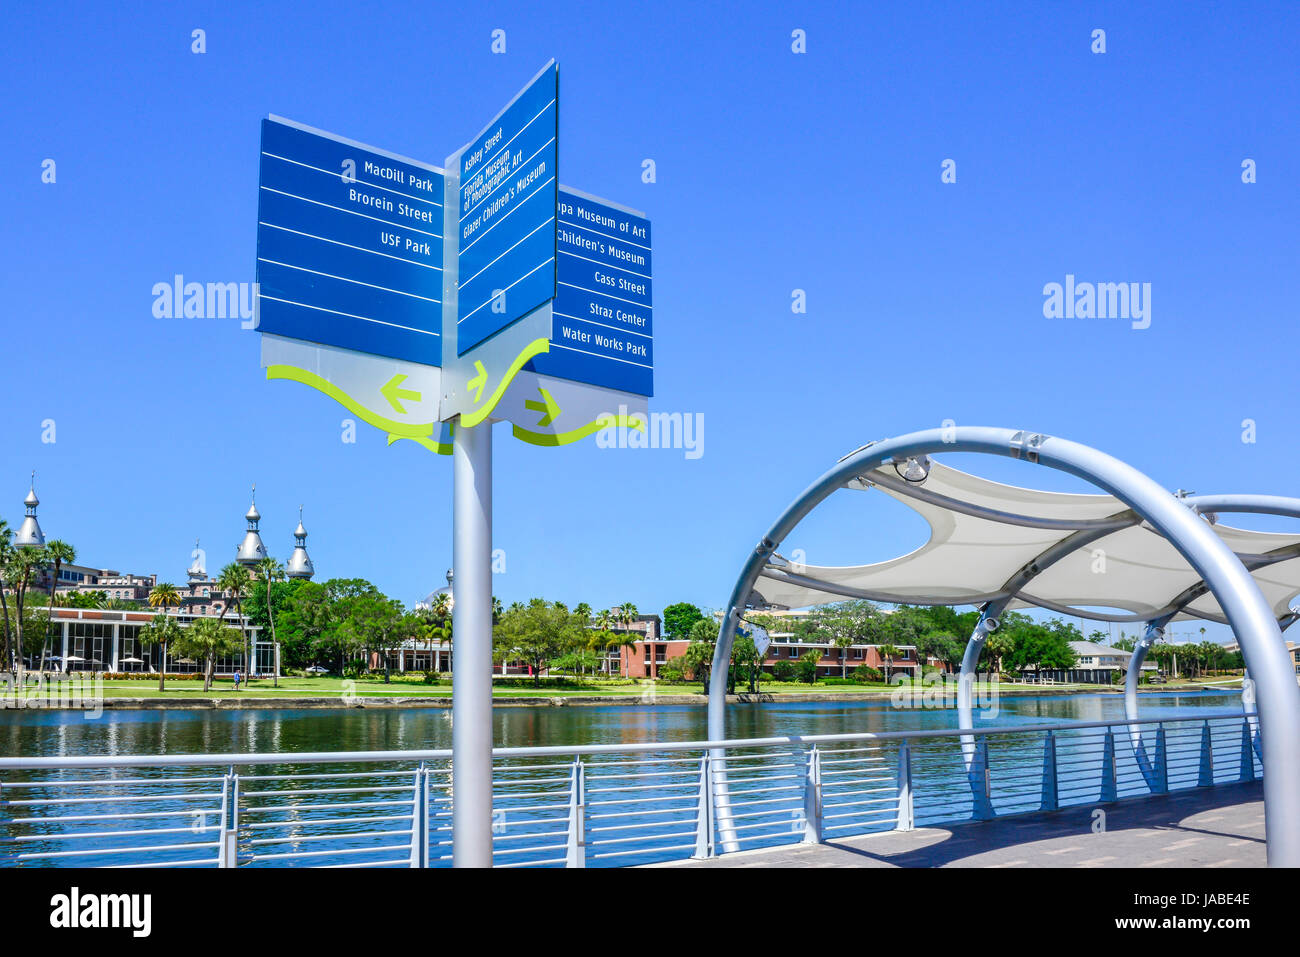 A blue directional information sign stands on Tampa Riverwalk on the Hillsborough River, overlooking the University of Tampa's campus in Tampa, FL Stock Photo